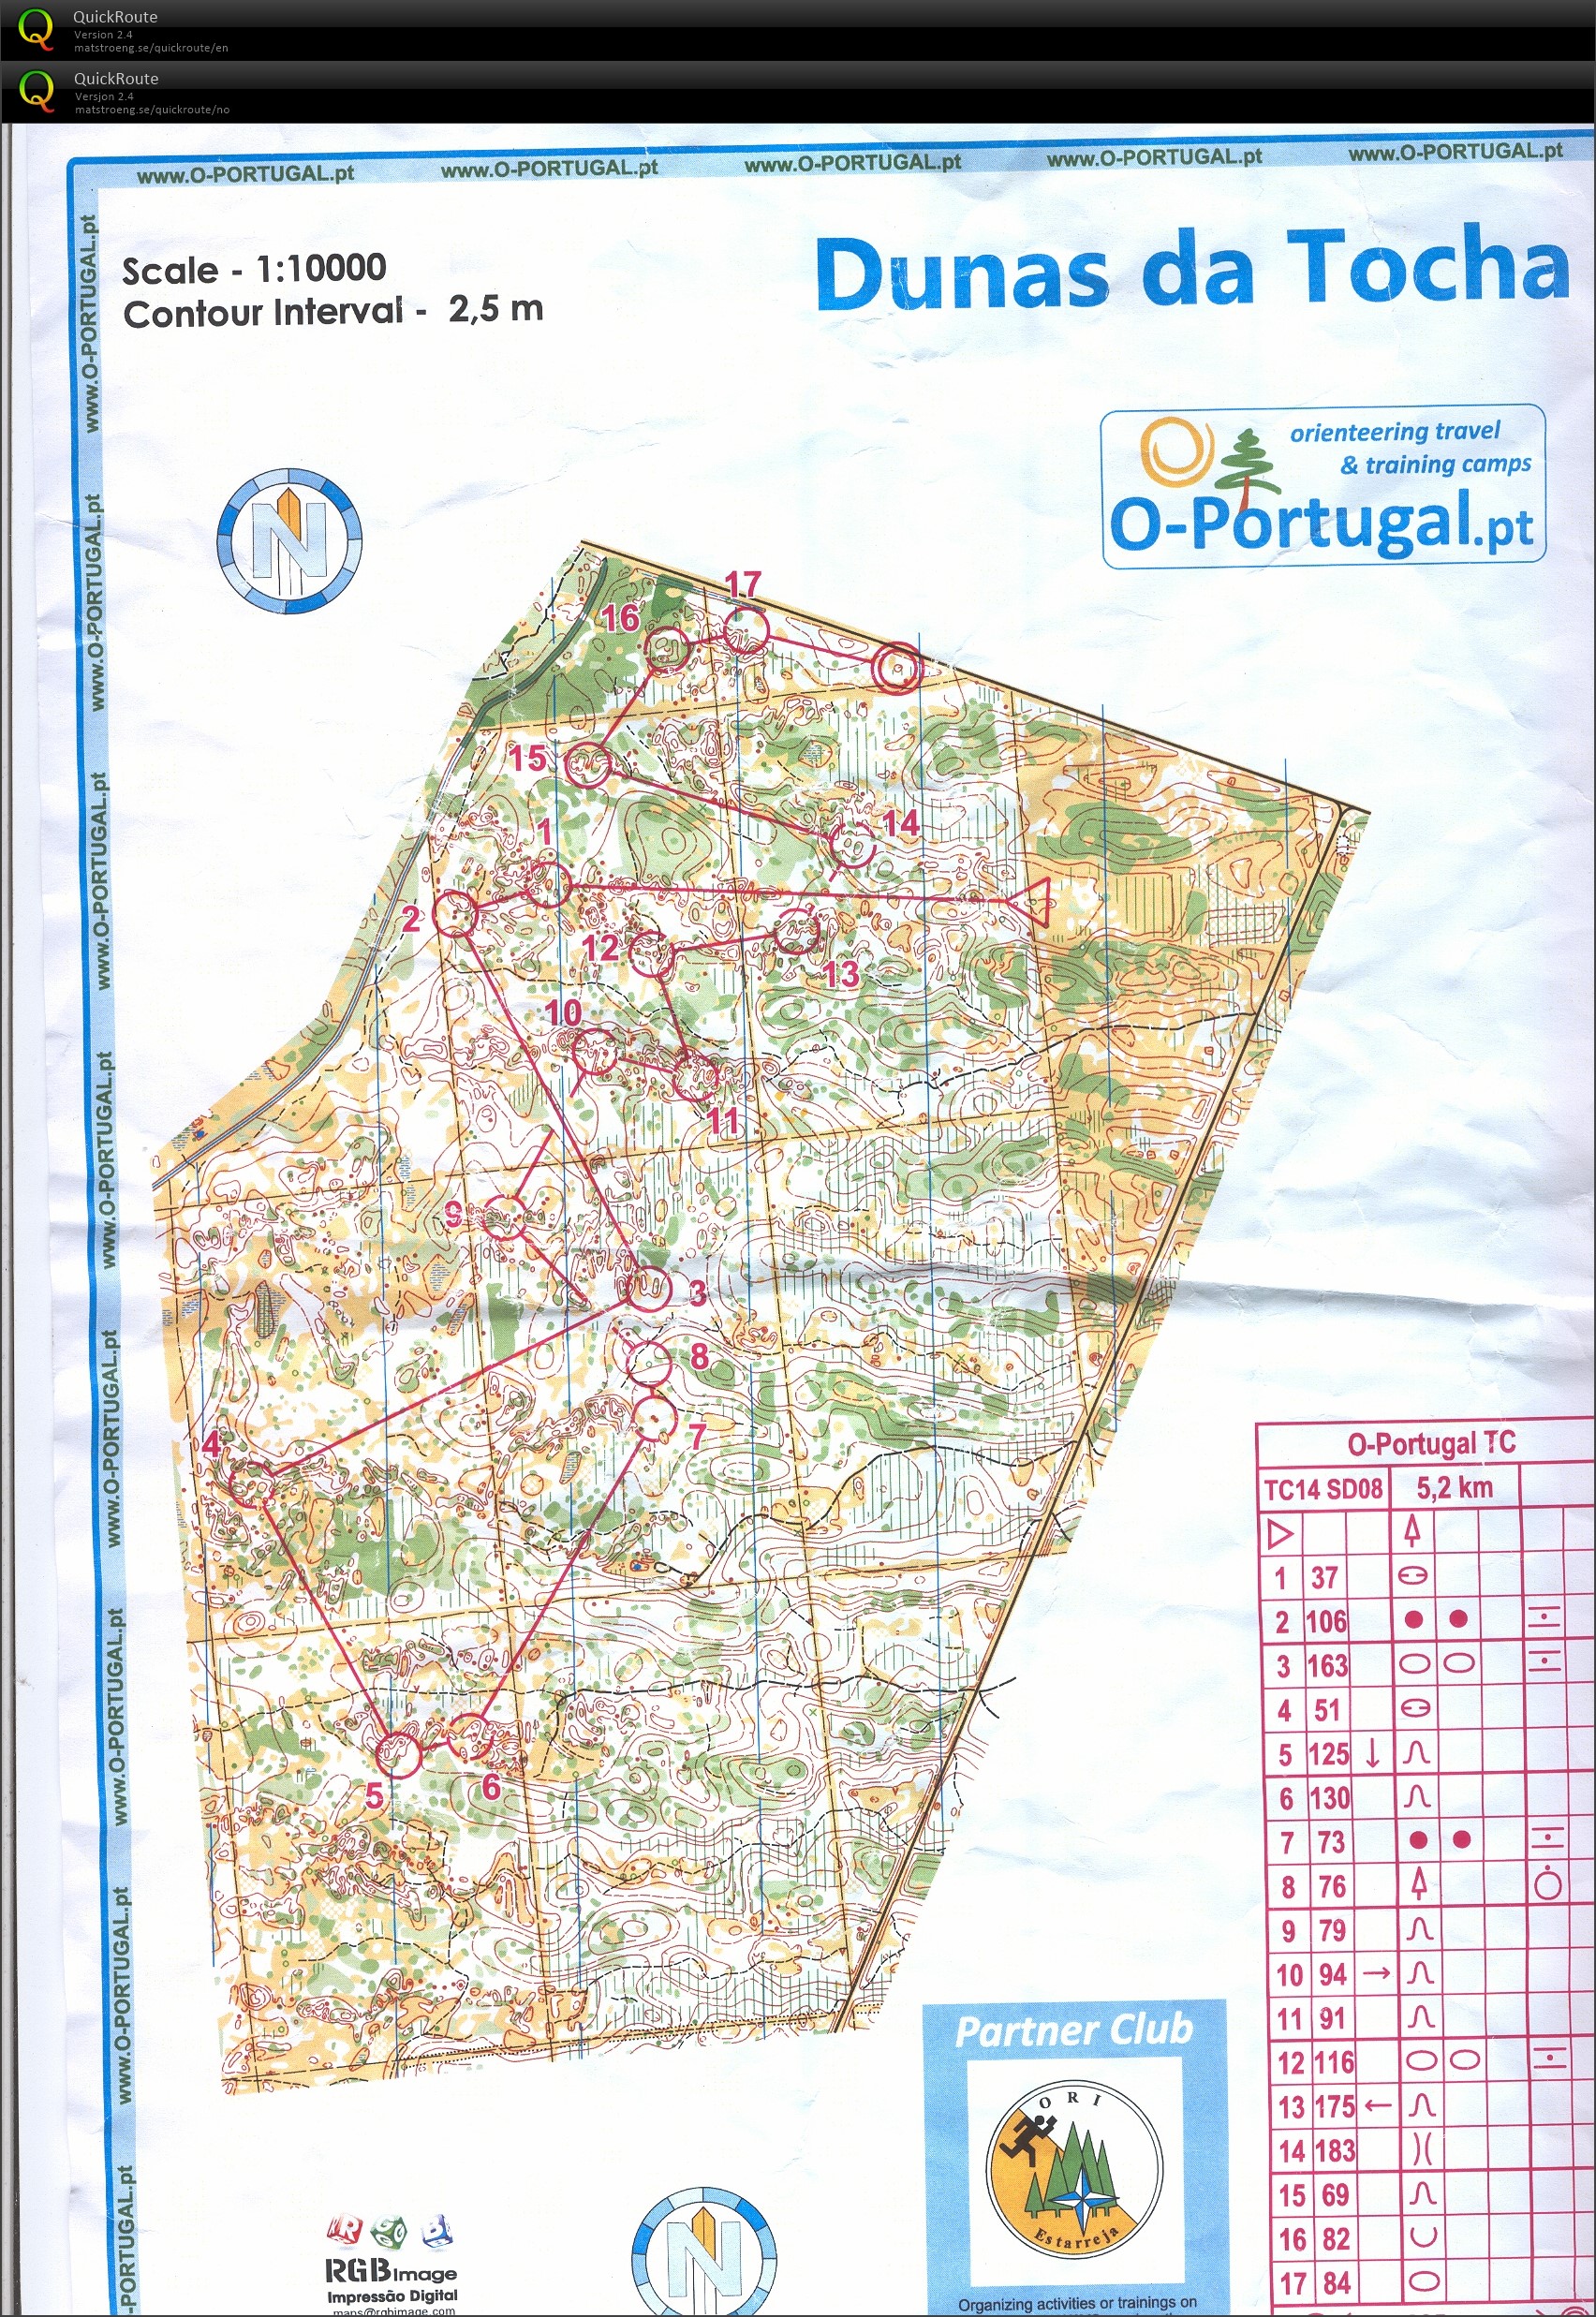 Portugal pass 7 (2014-02-19)